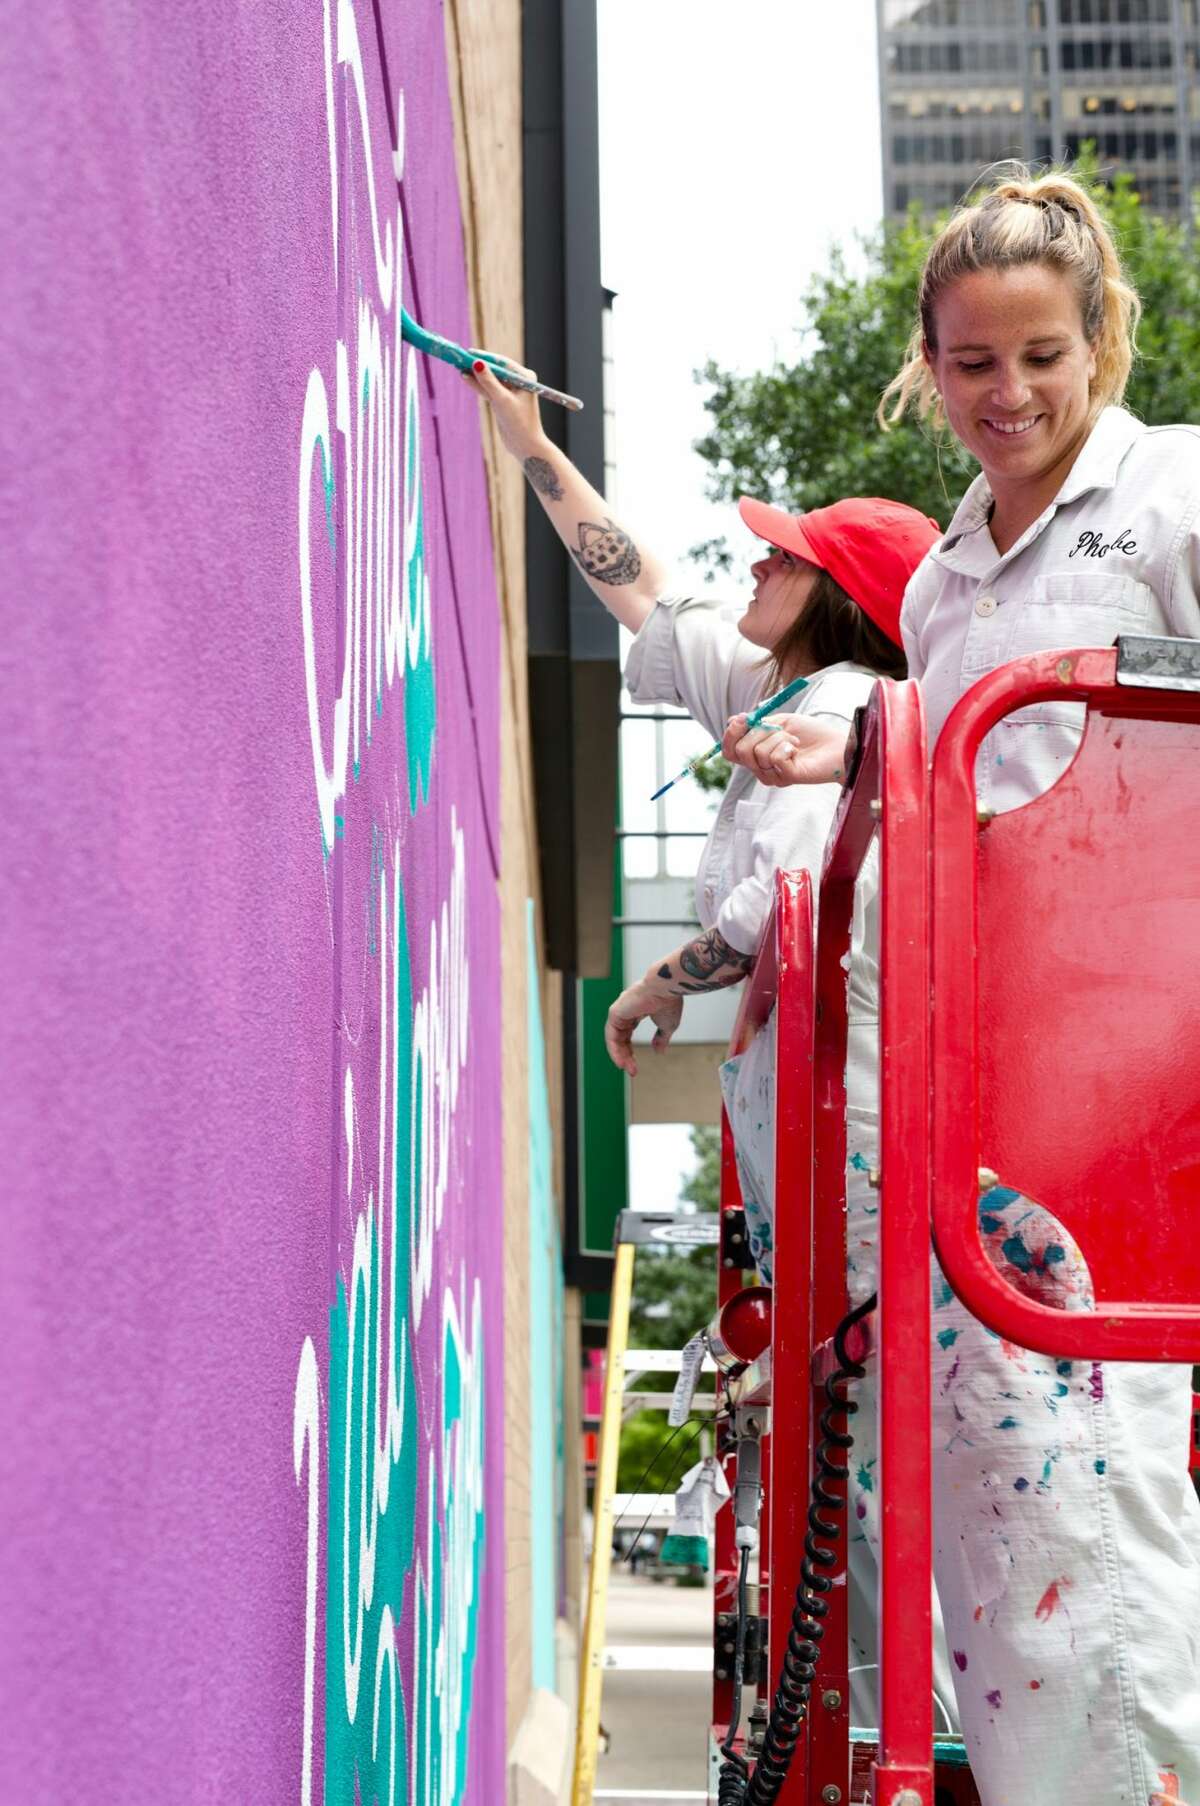 Artists Roxy Prima and Phoebe Cornog were in town to oversee the painting of the vibrant murals they both designed. 